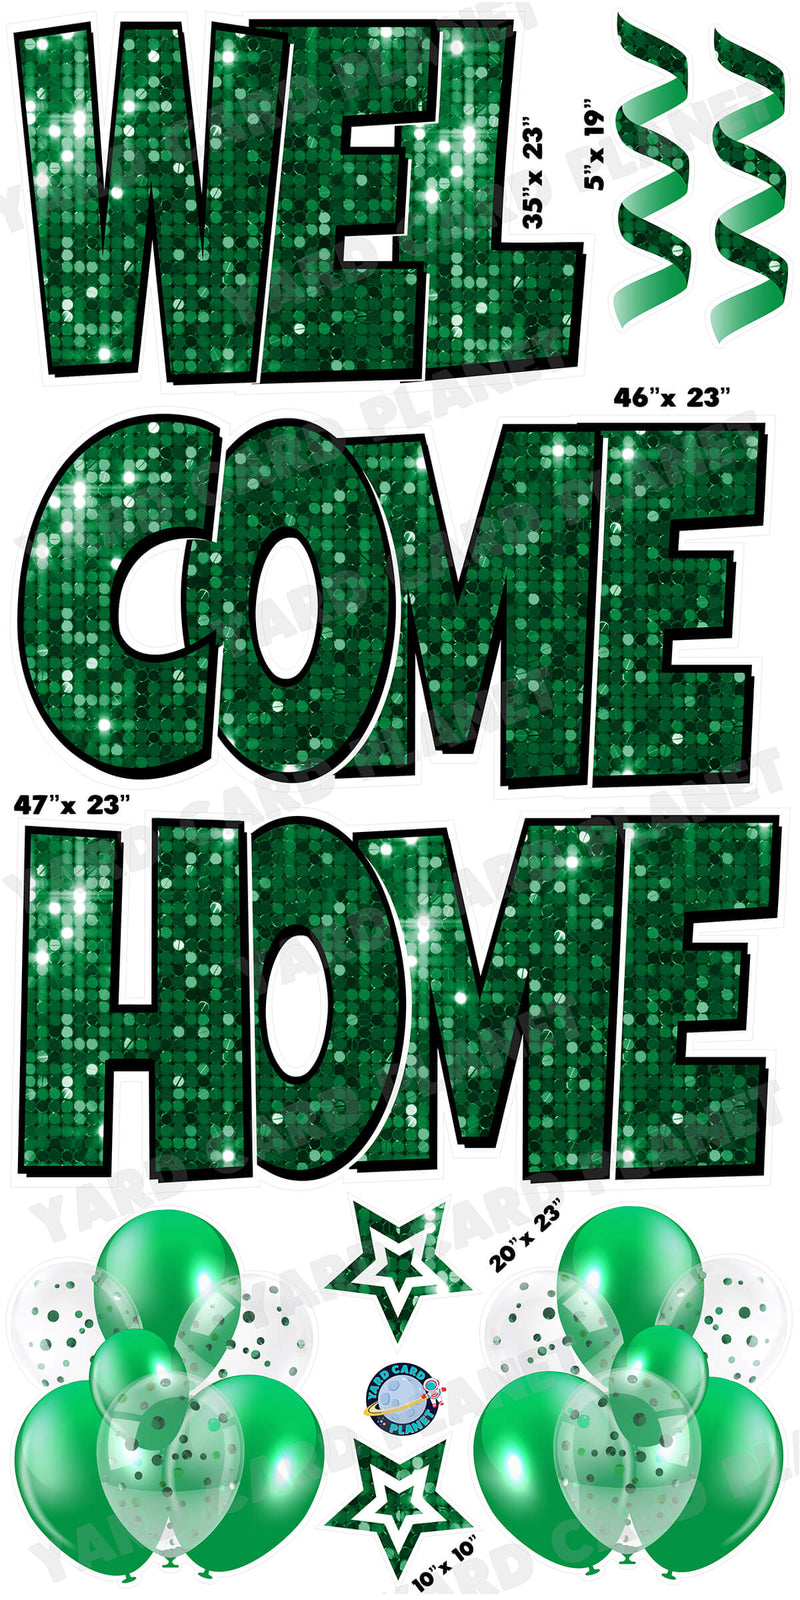 Large 23" Welcome Home Yard Card EZ Quick Sets in Luckiest Guy Font and Flair in Green Sequin Pattern